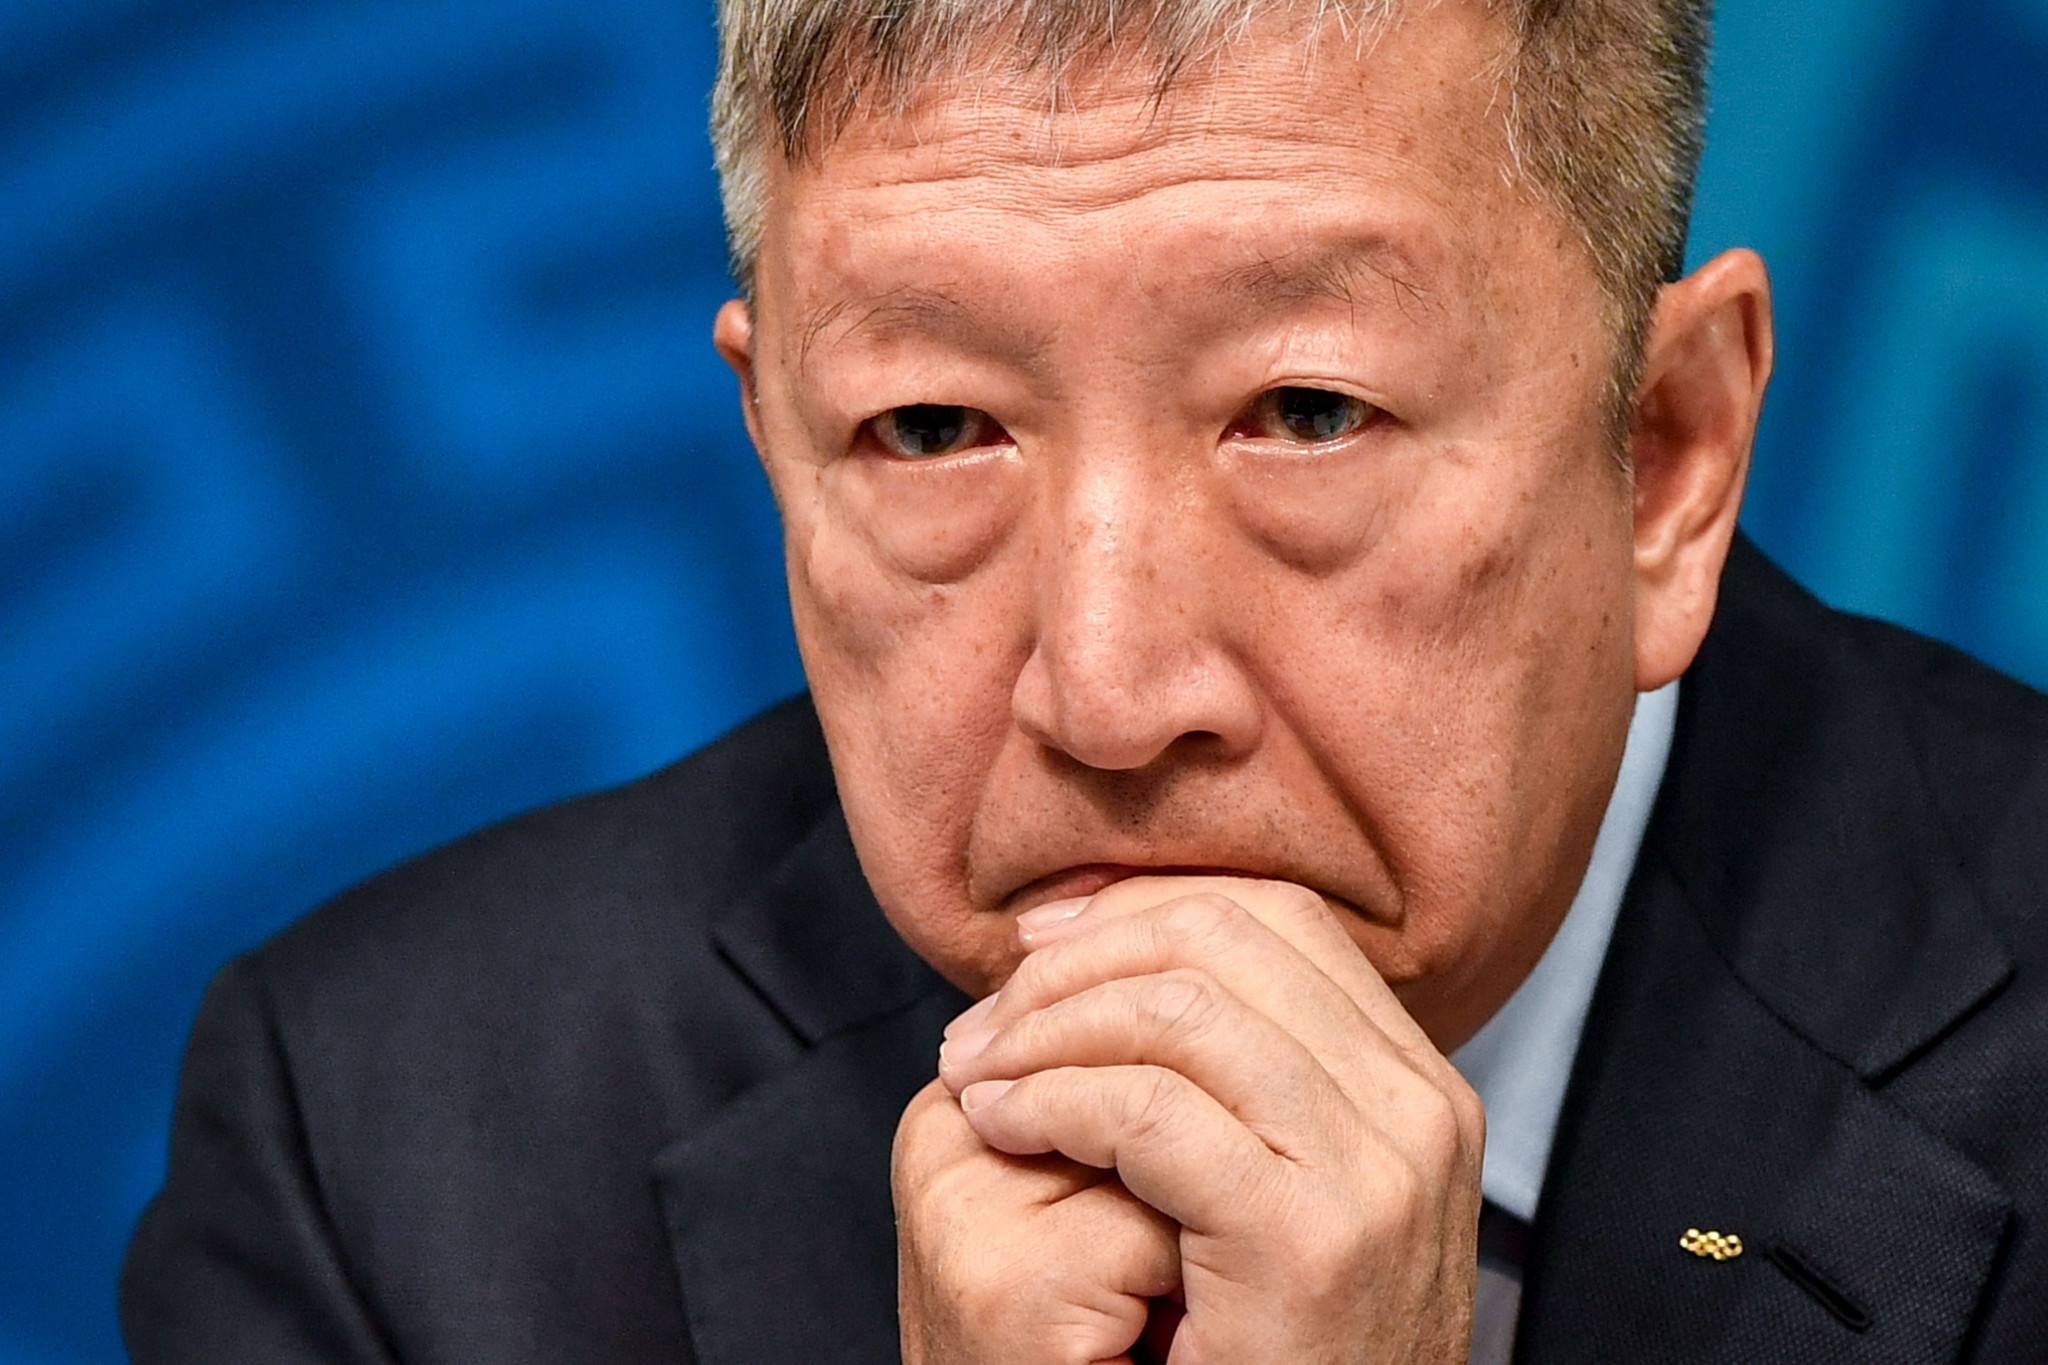 IOC vice-president Ng Ser Miang rejects findings that he interfered in World Sailing election